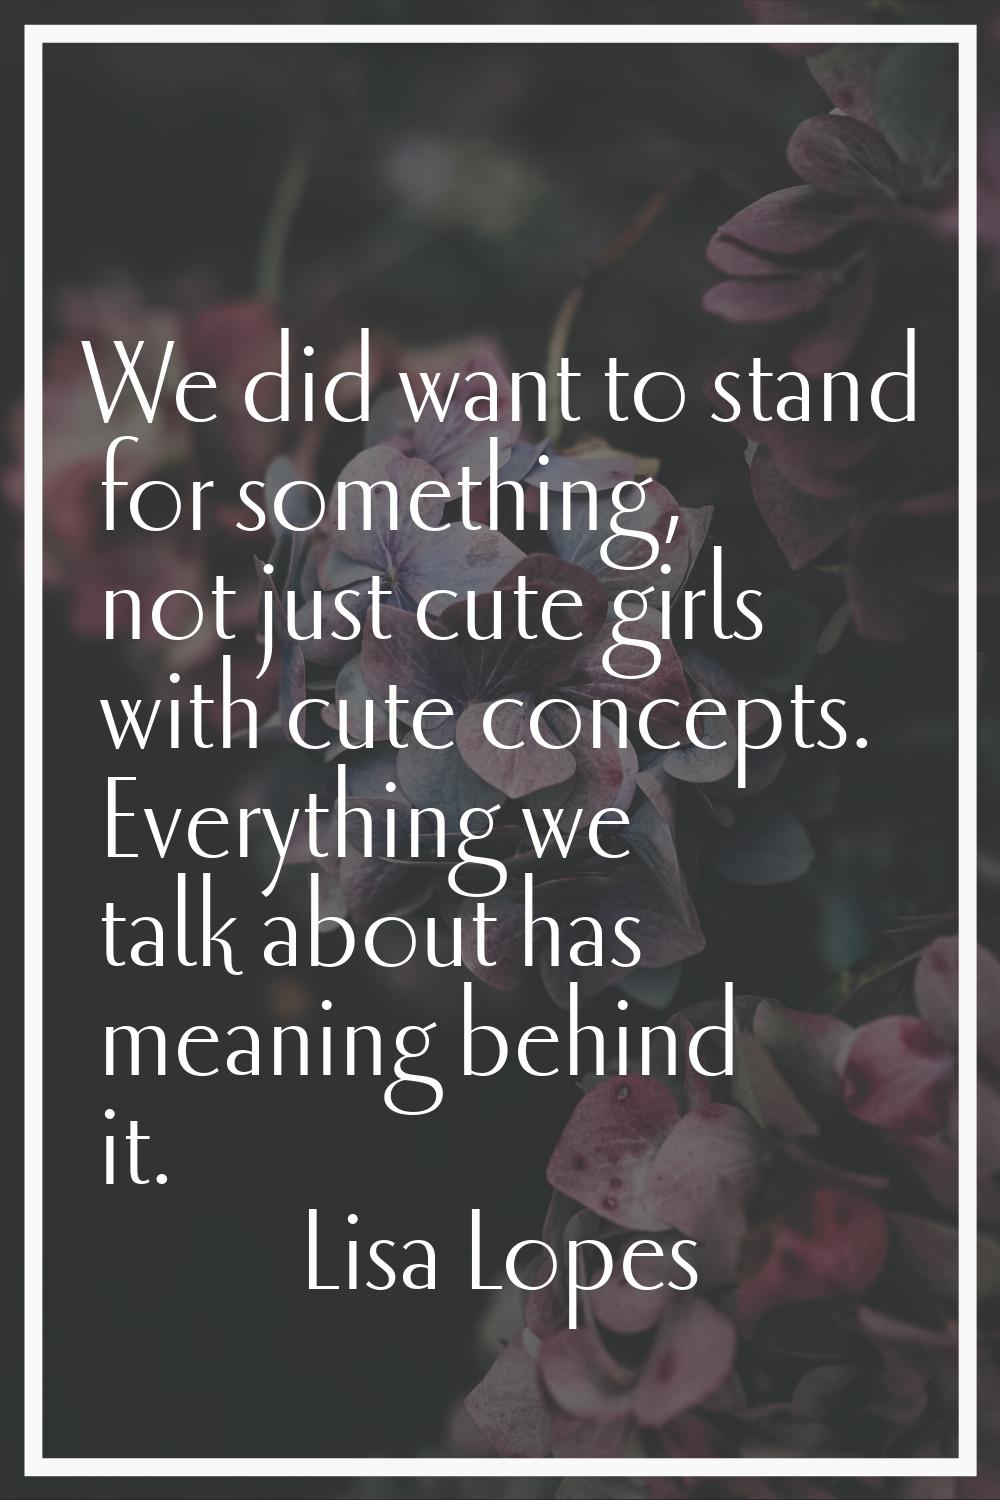 We did want to stand for something, not just cute girls with cute concepts. Everything we talk abou